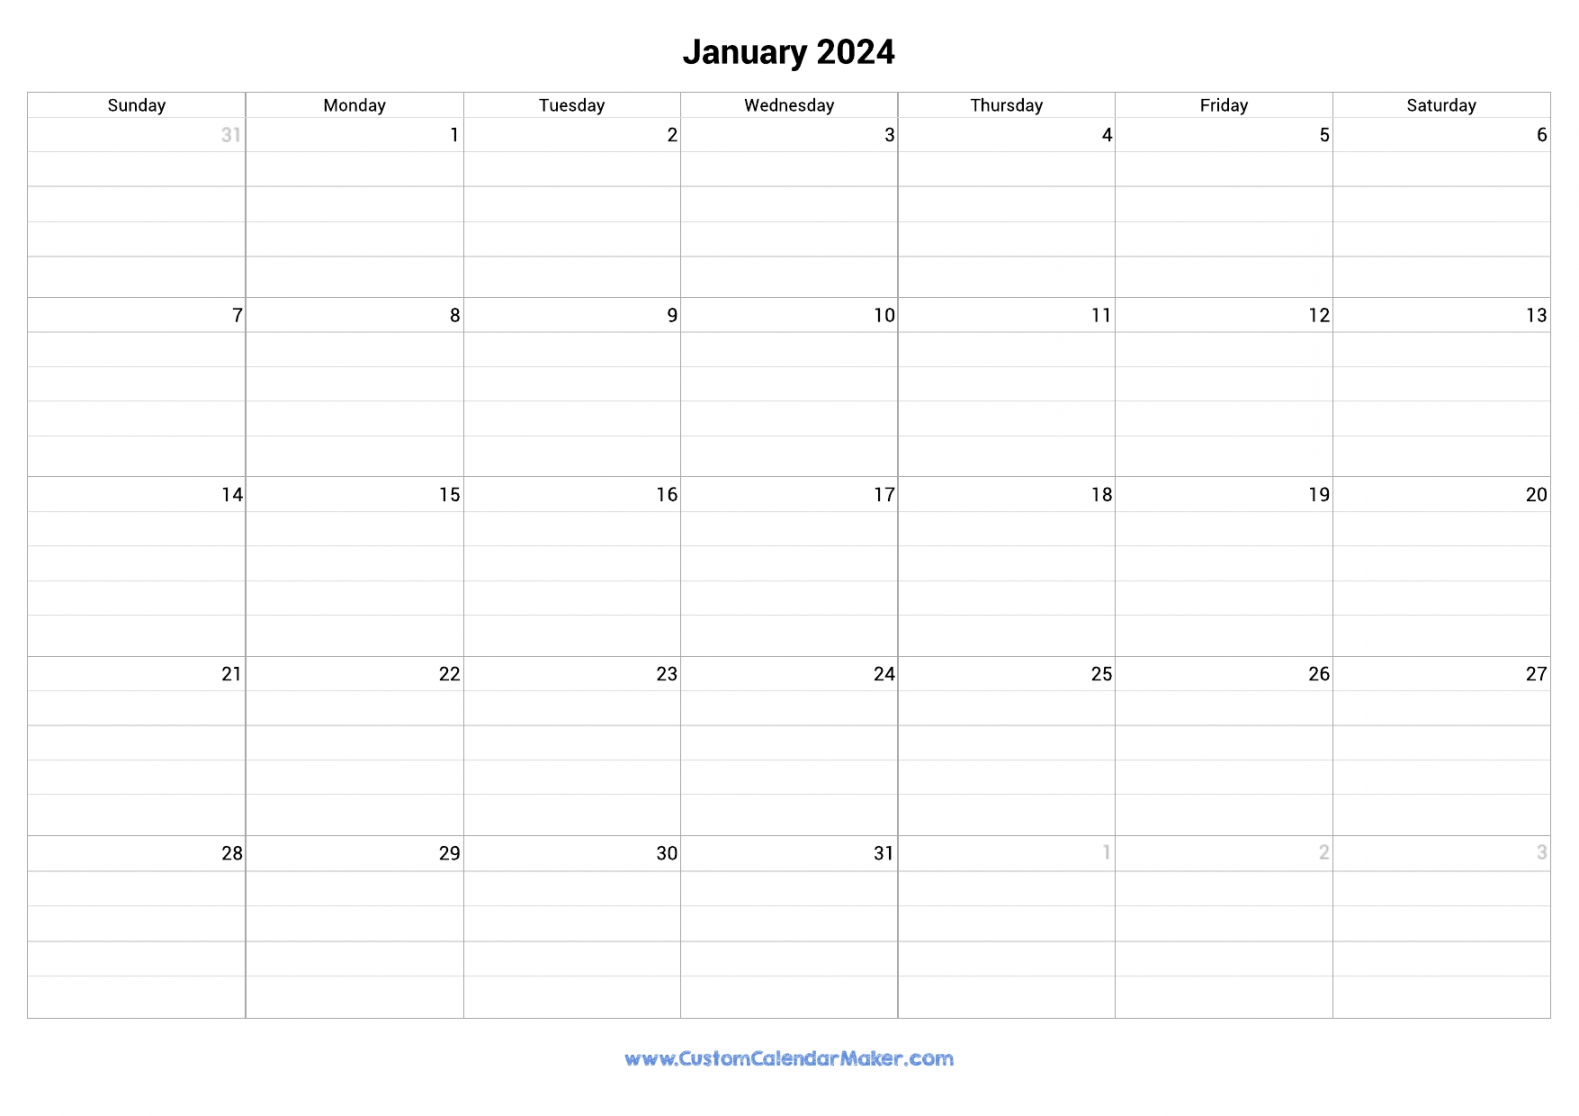 January Fillable Calendar Grid With Lines